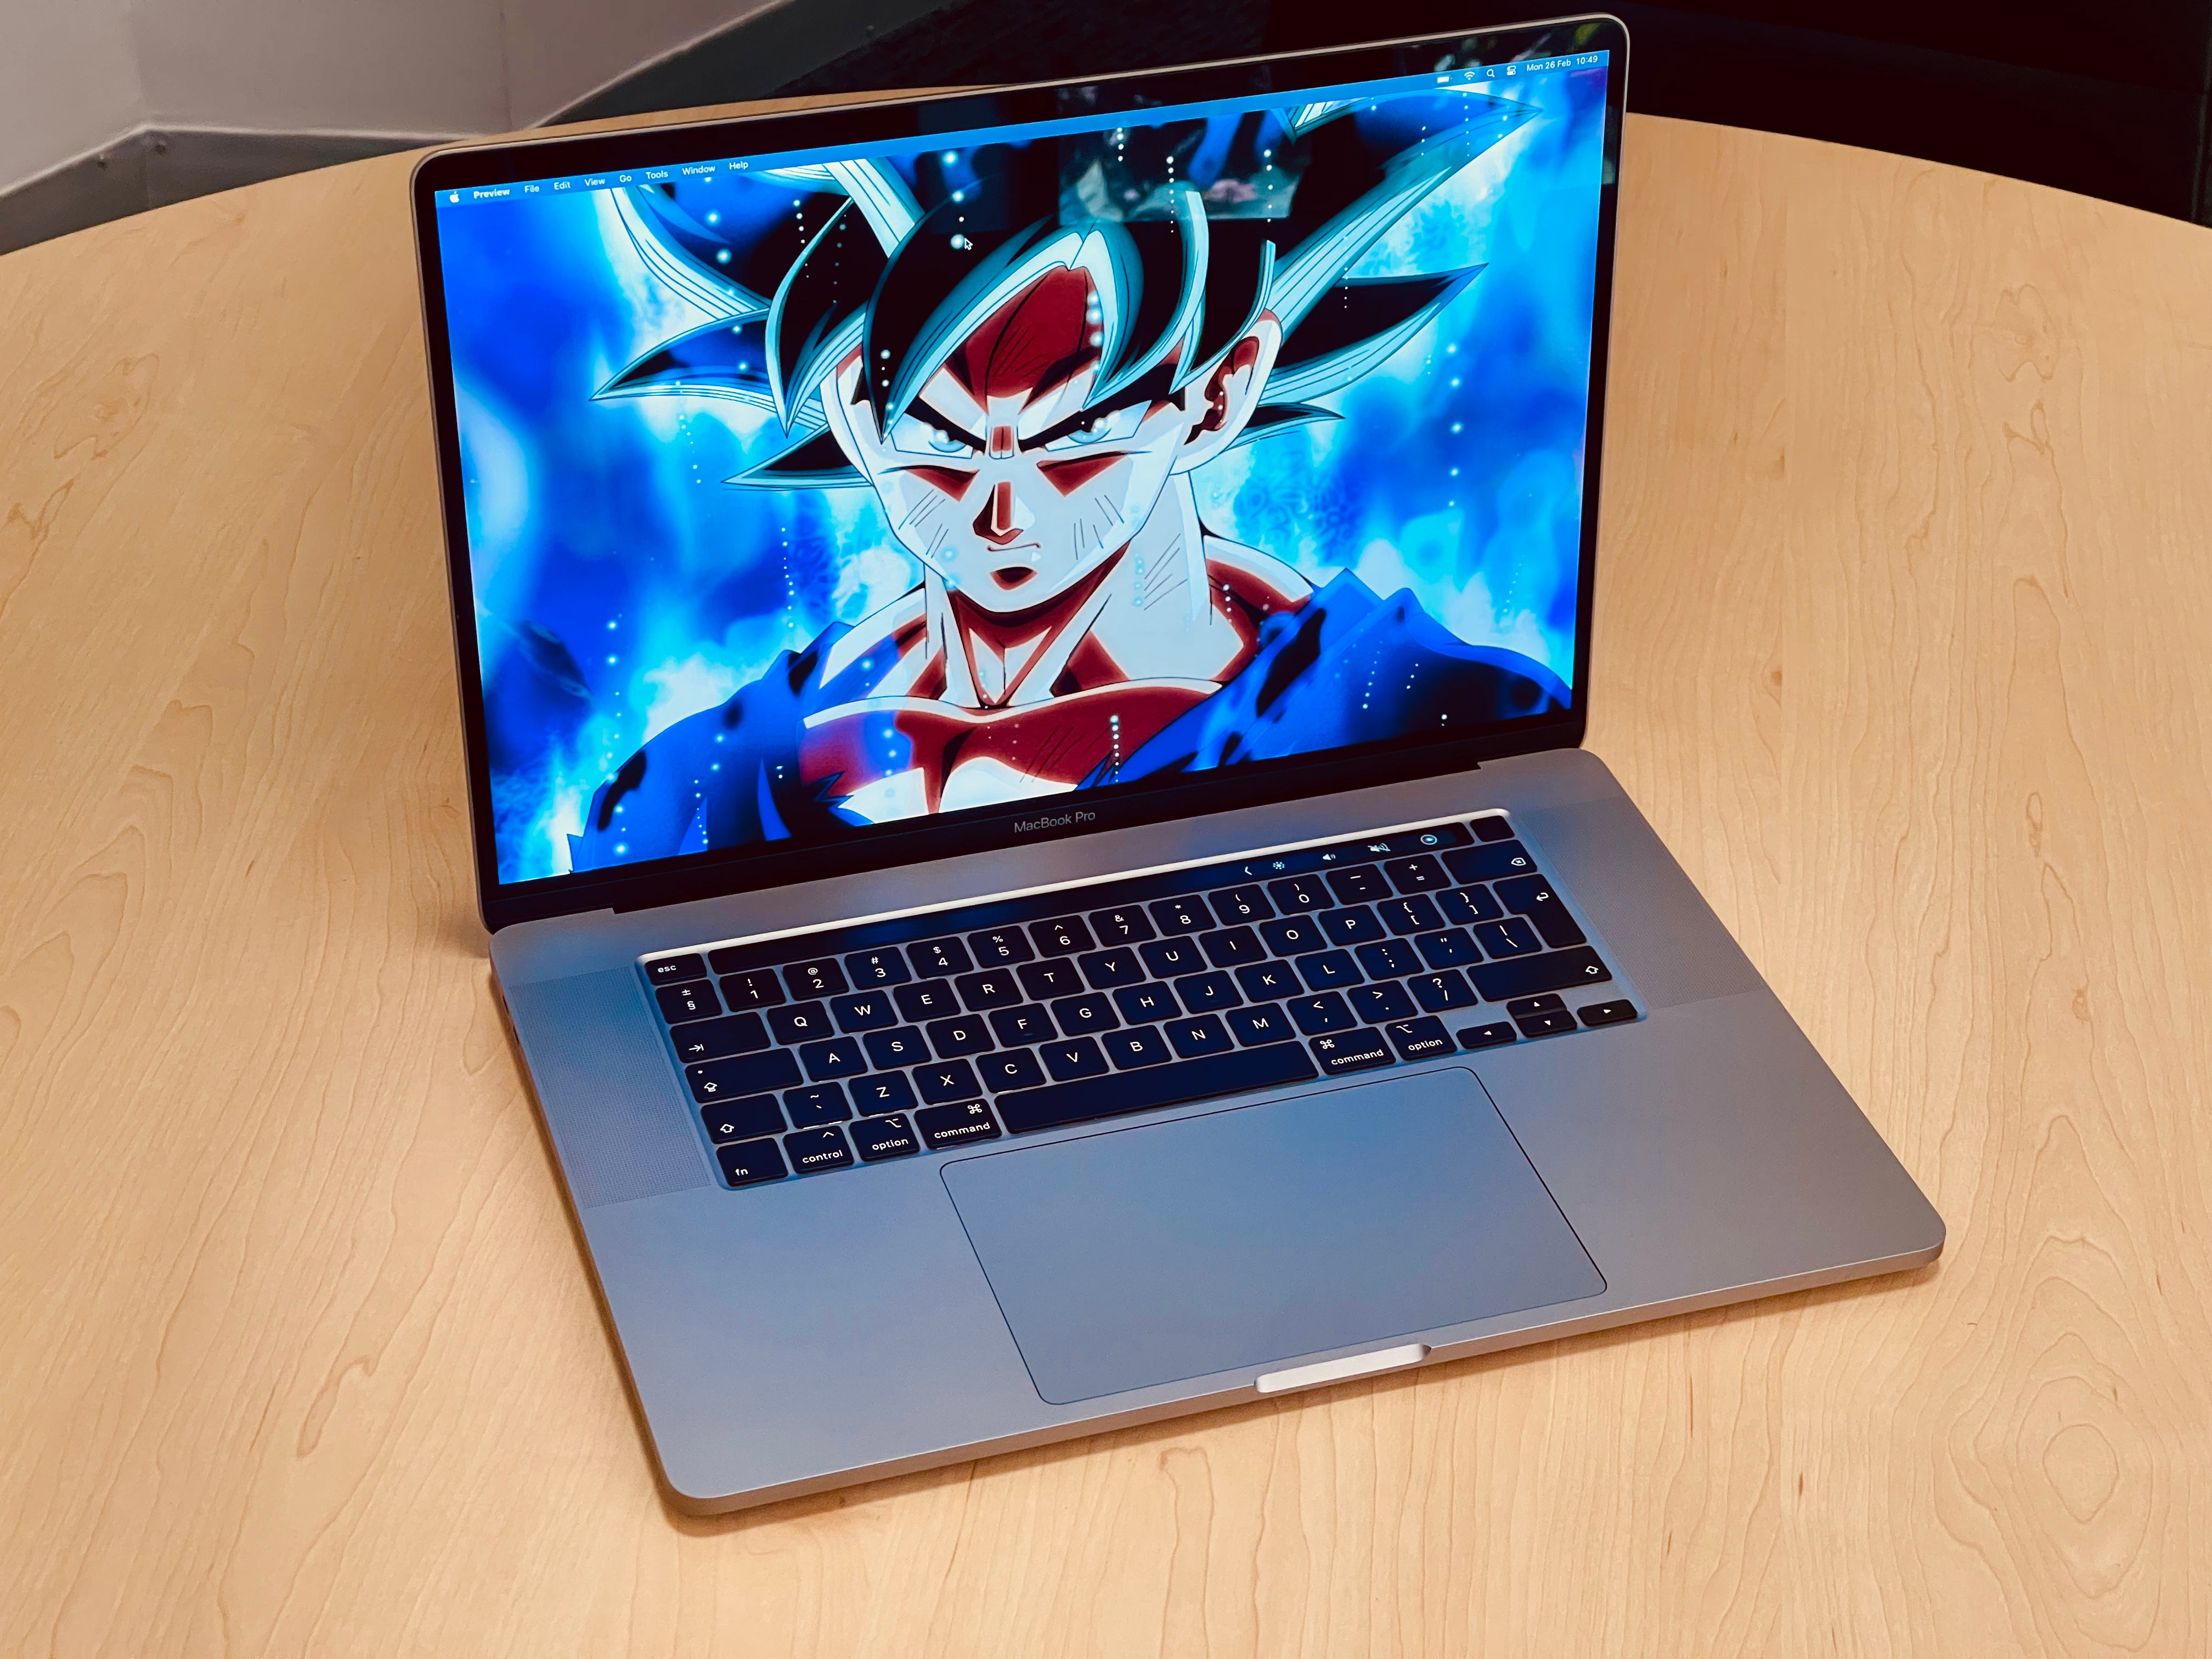 2019 Apple MacBook Pro 16-inch 2.3GHz 8-Core i9 (16GB RAM, 1TB, Space Gray) - Pre Owned / 3 Month Warranty - Mac Shack